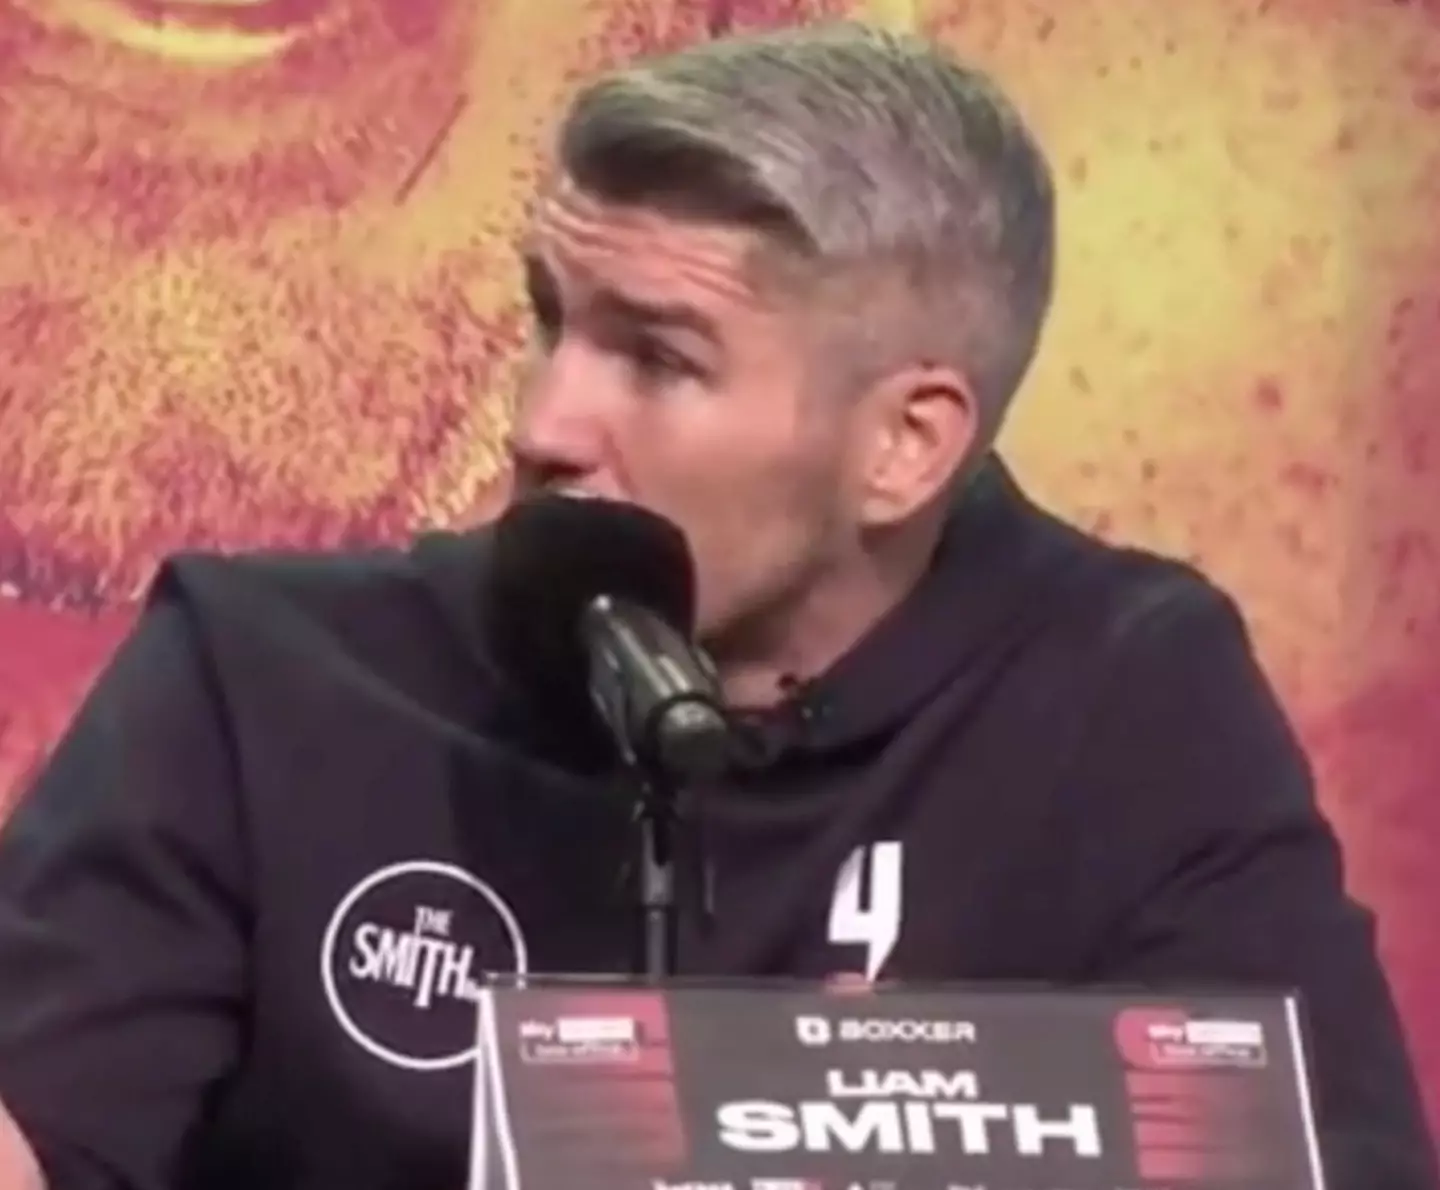 Liam Smith grilled Chris Eubank Jr on his sexuality.